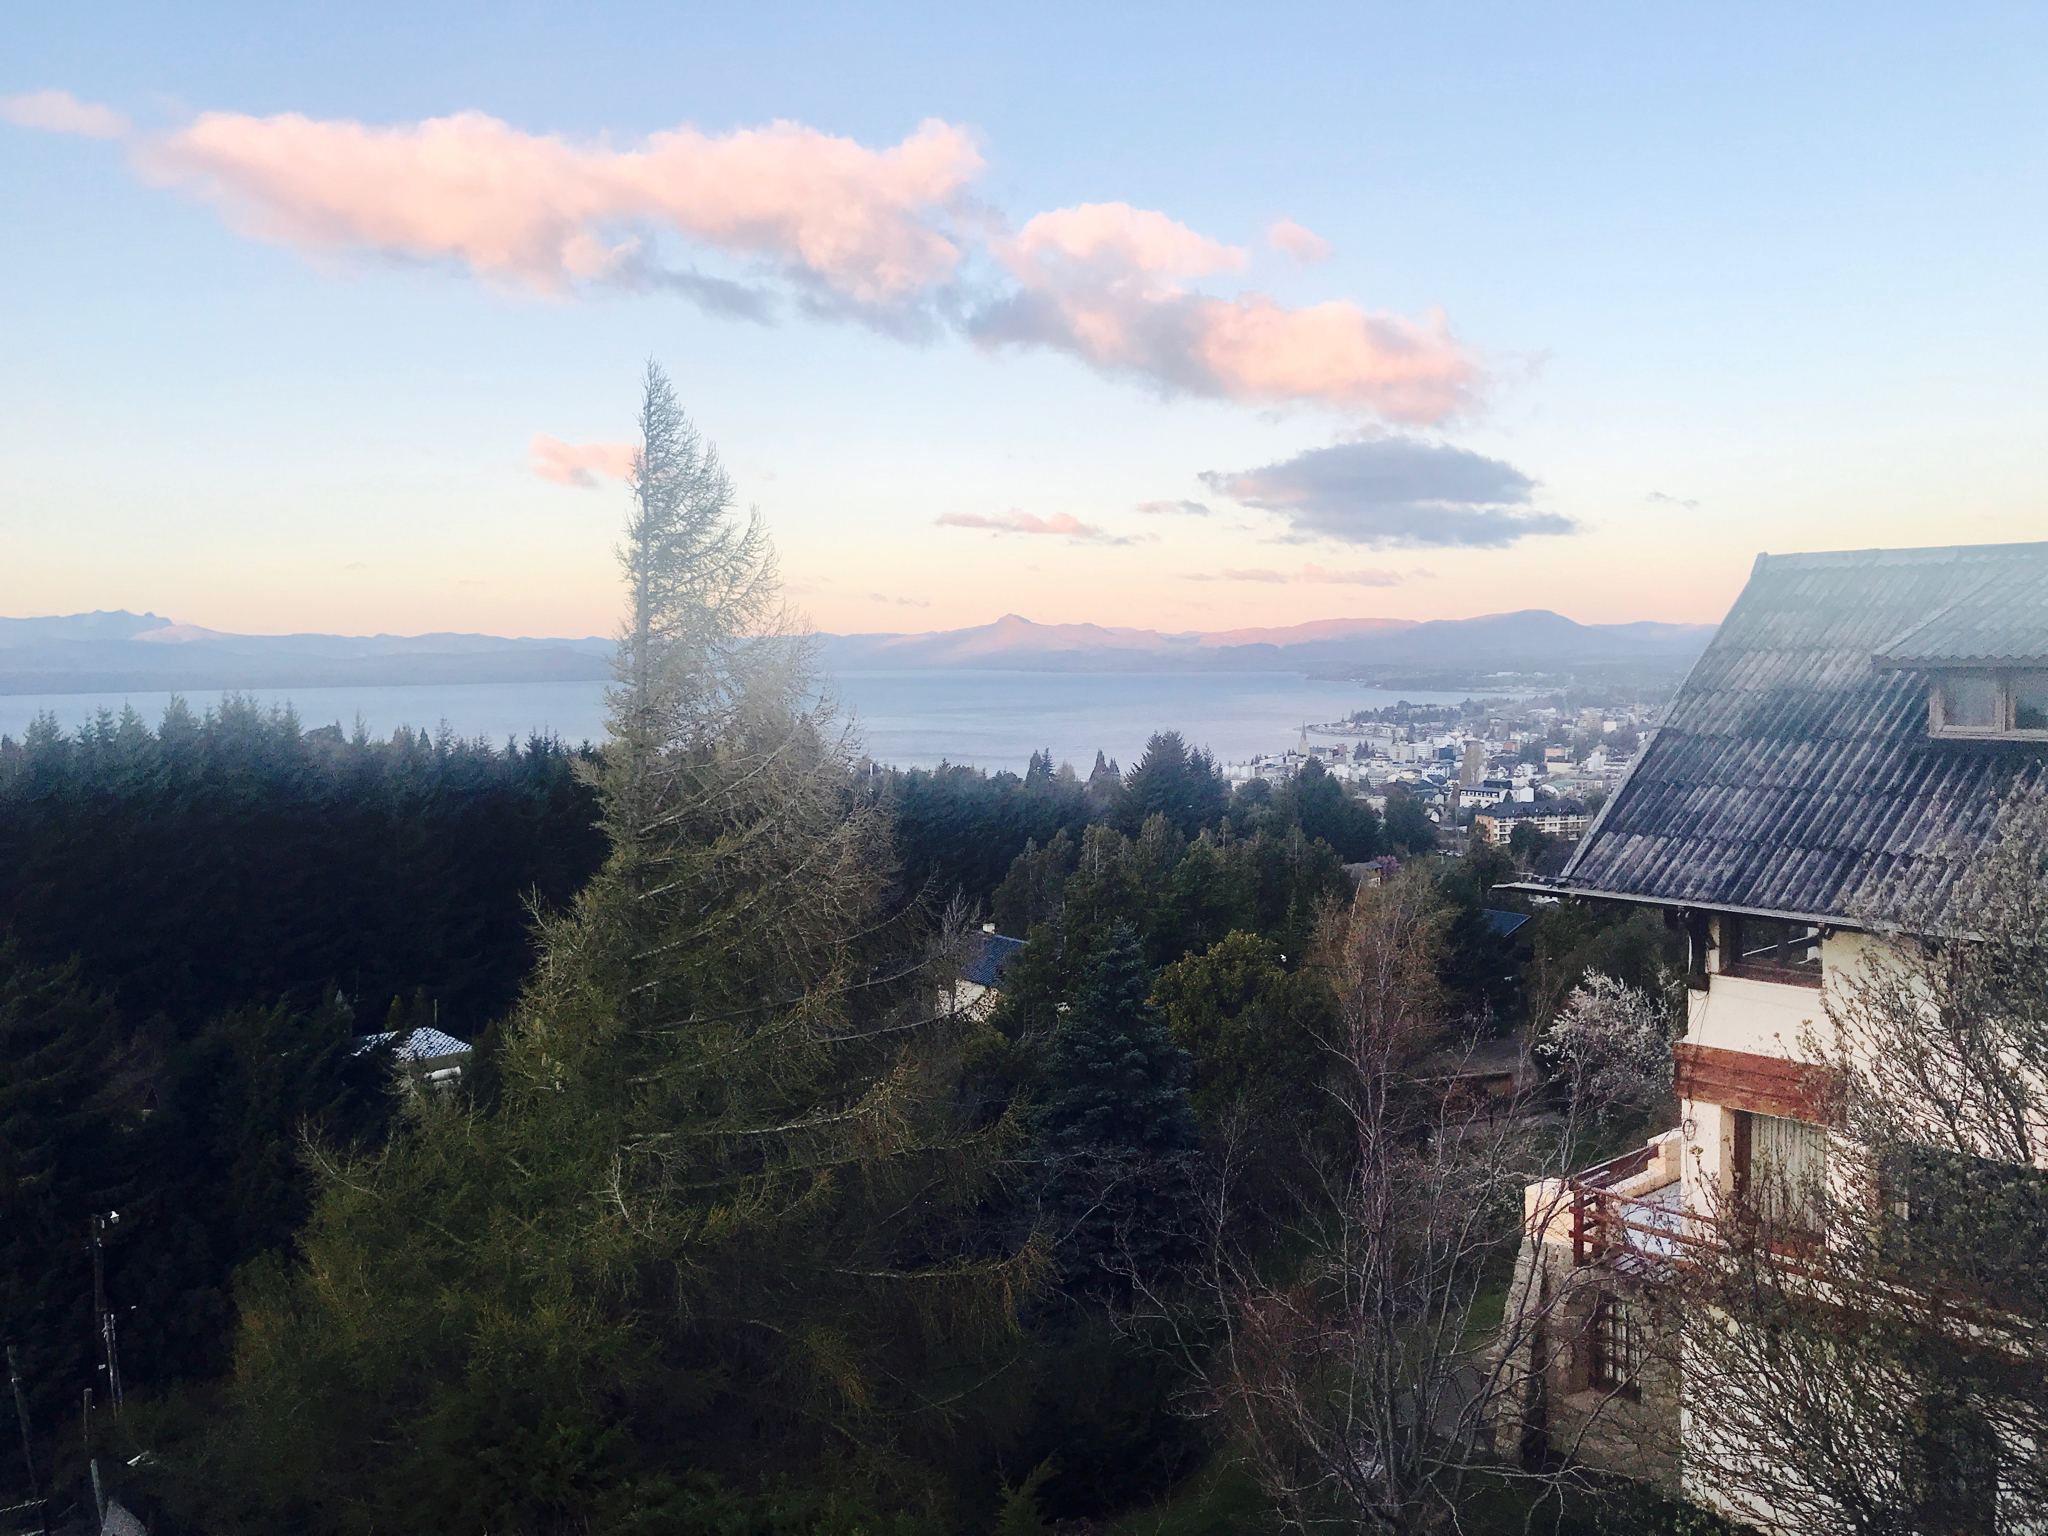 Plan a trip to Bariloche by renting an Airbnb with a beautiful view! This is the view from our Airbnb in centro Bariloche.